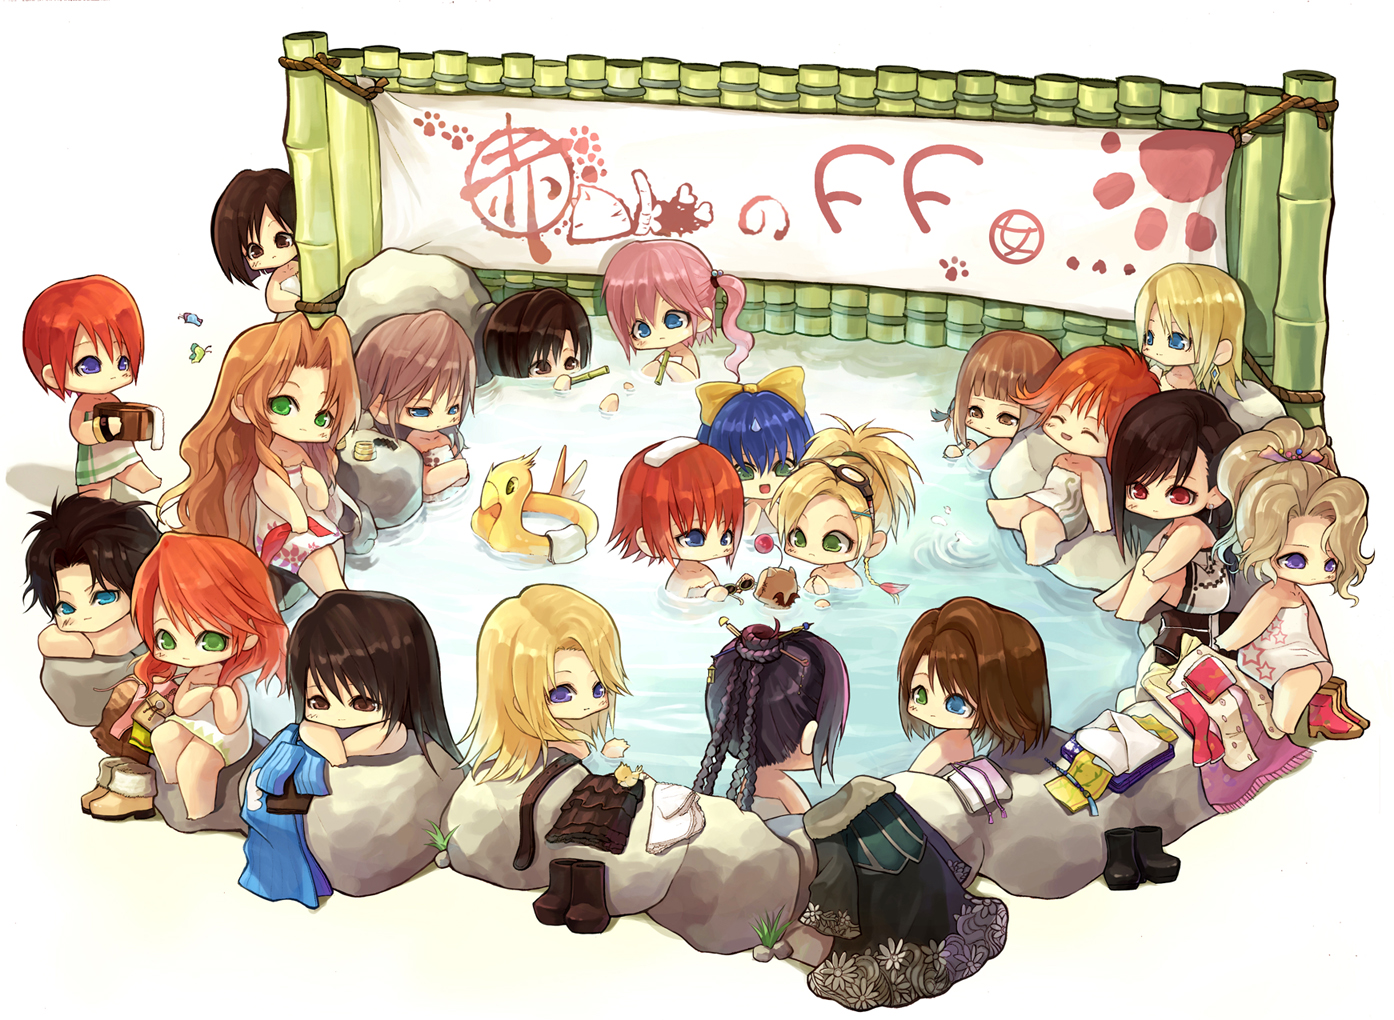 This image showcases a vibrant desktop wallpaper featuring various Chibi characters from popular video game franchises like Final Fantasy and Kingdom Hearts.